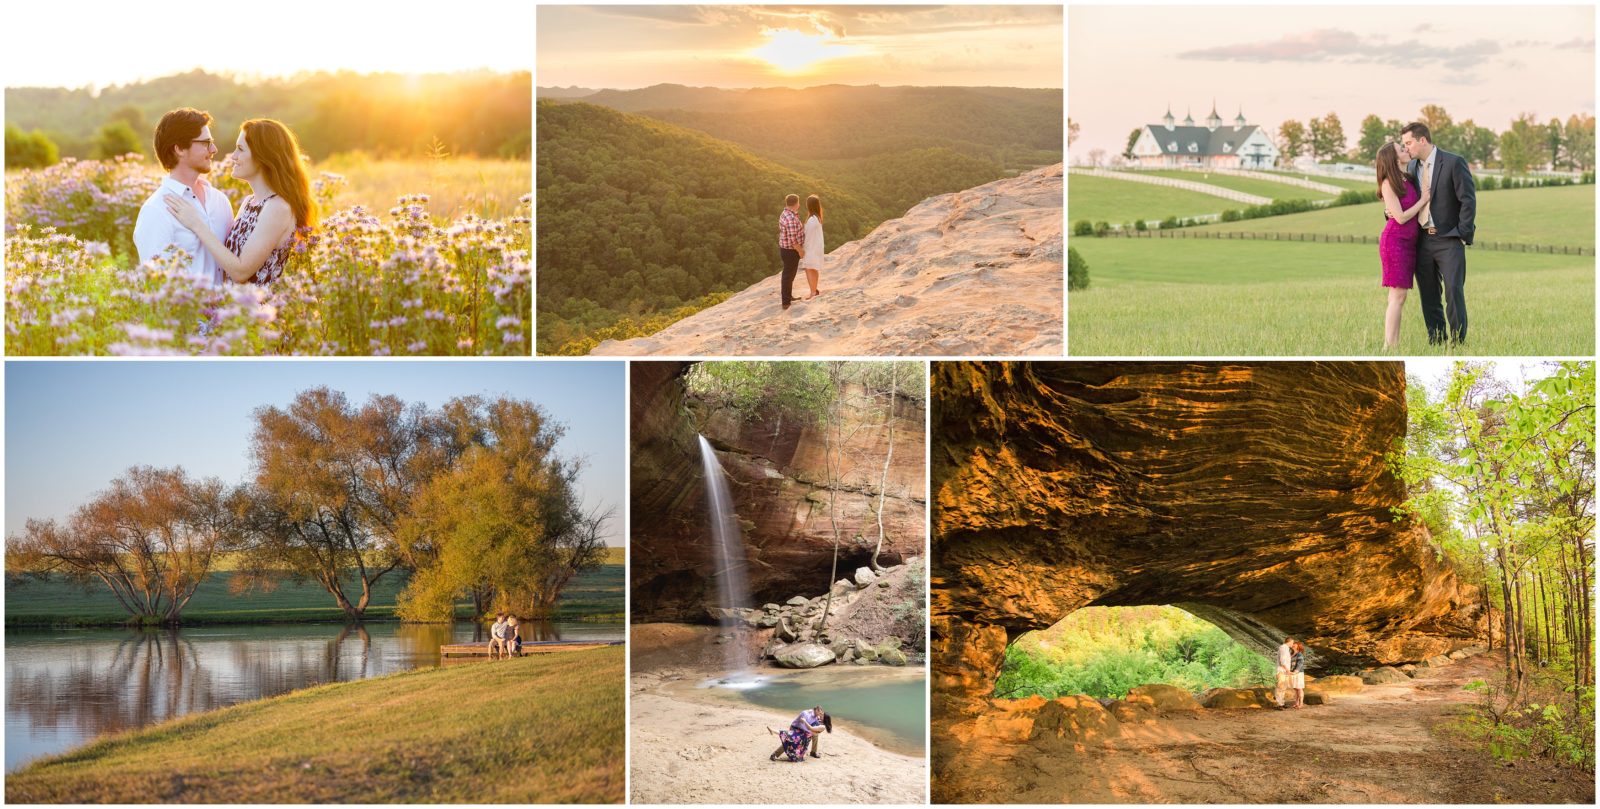 Engagement Session Locations in Kentucky.